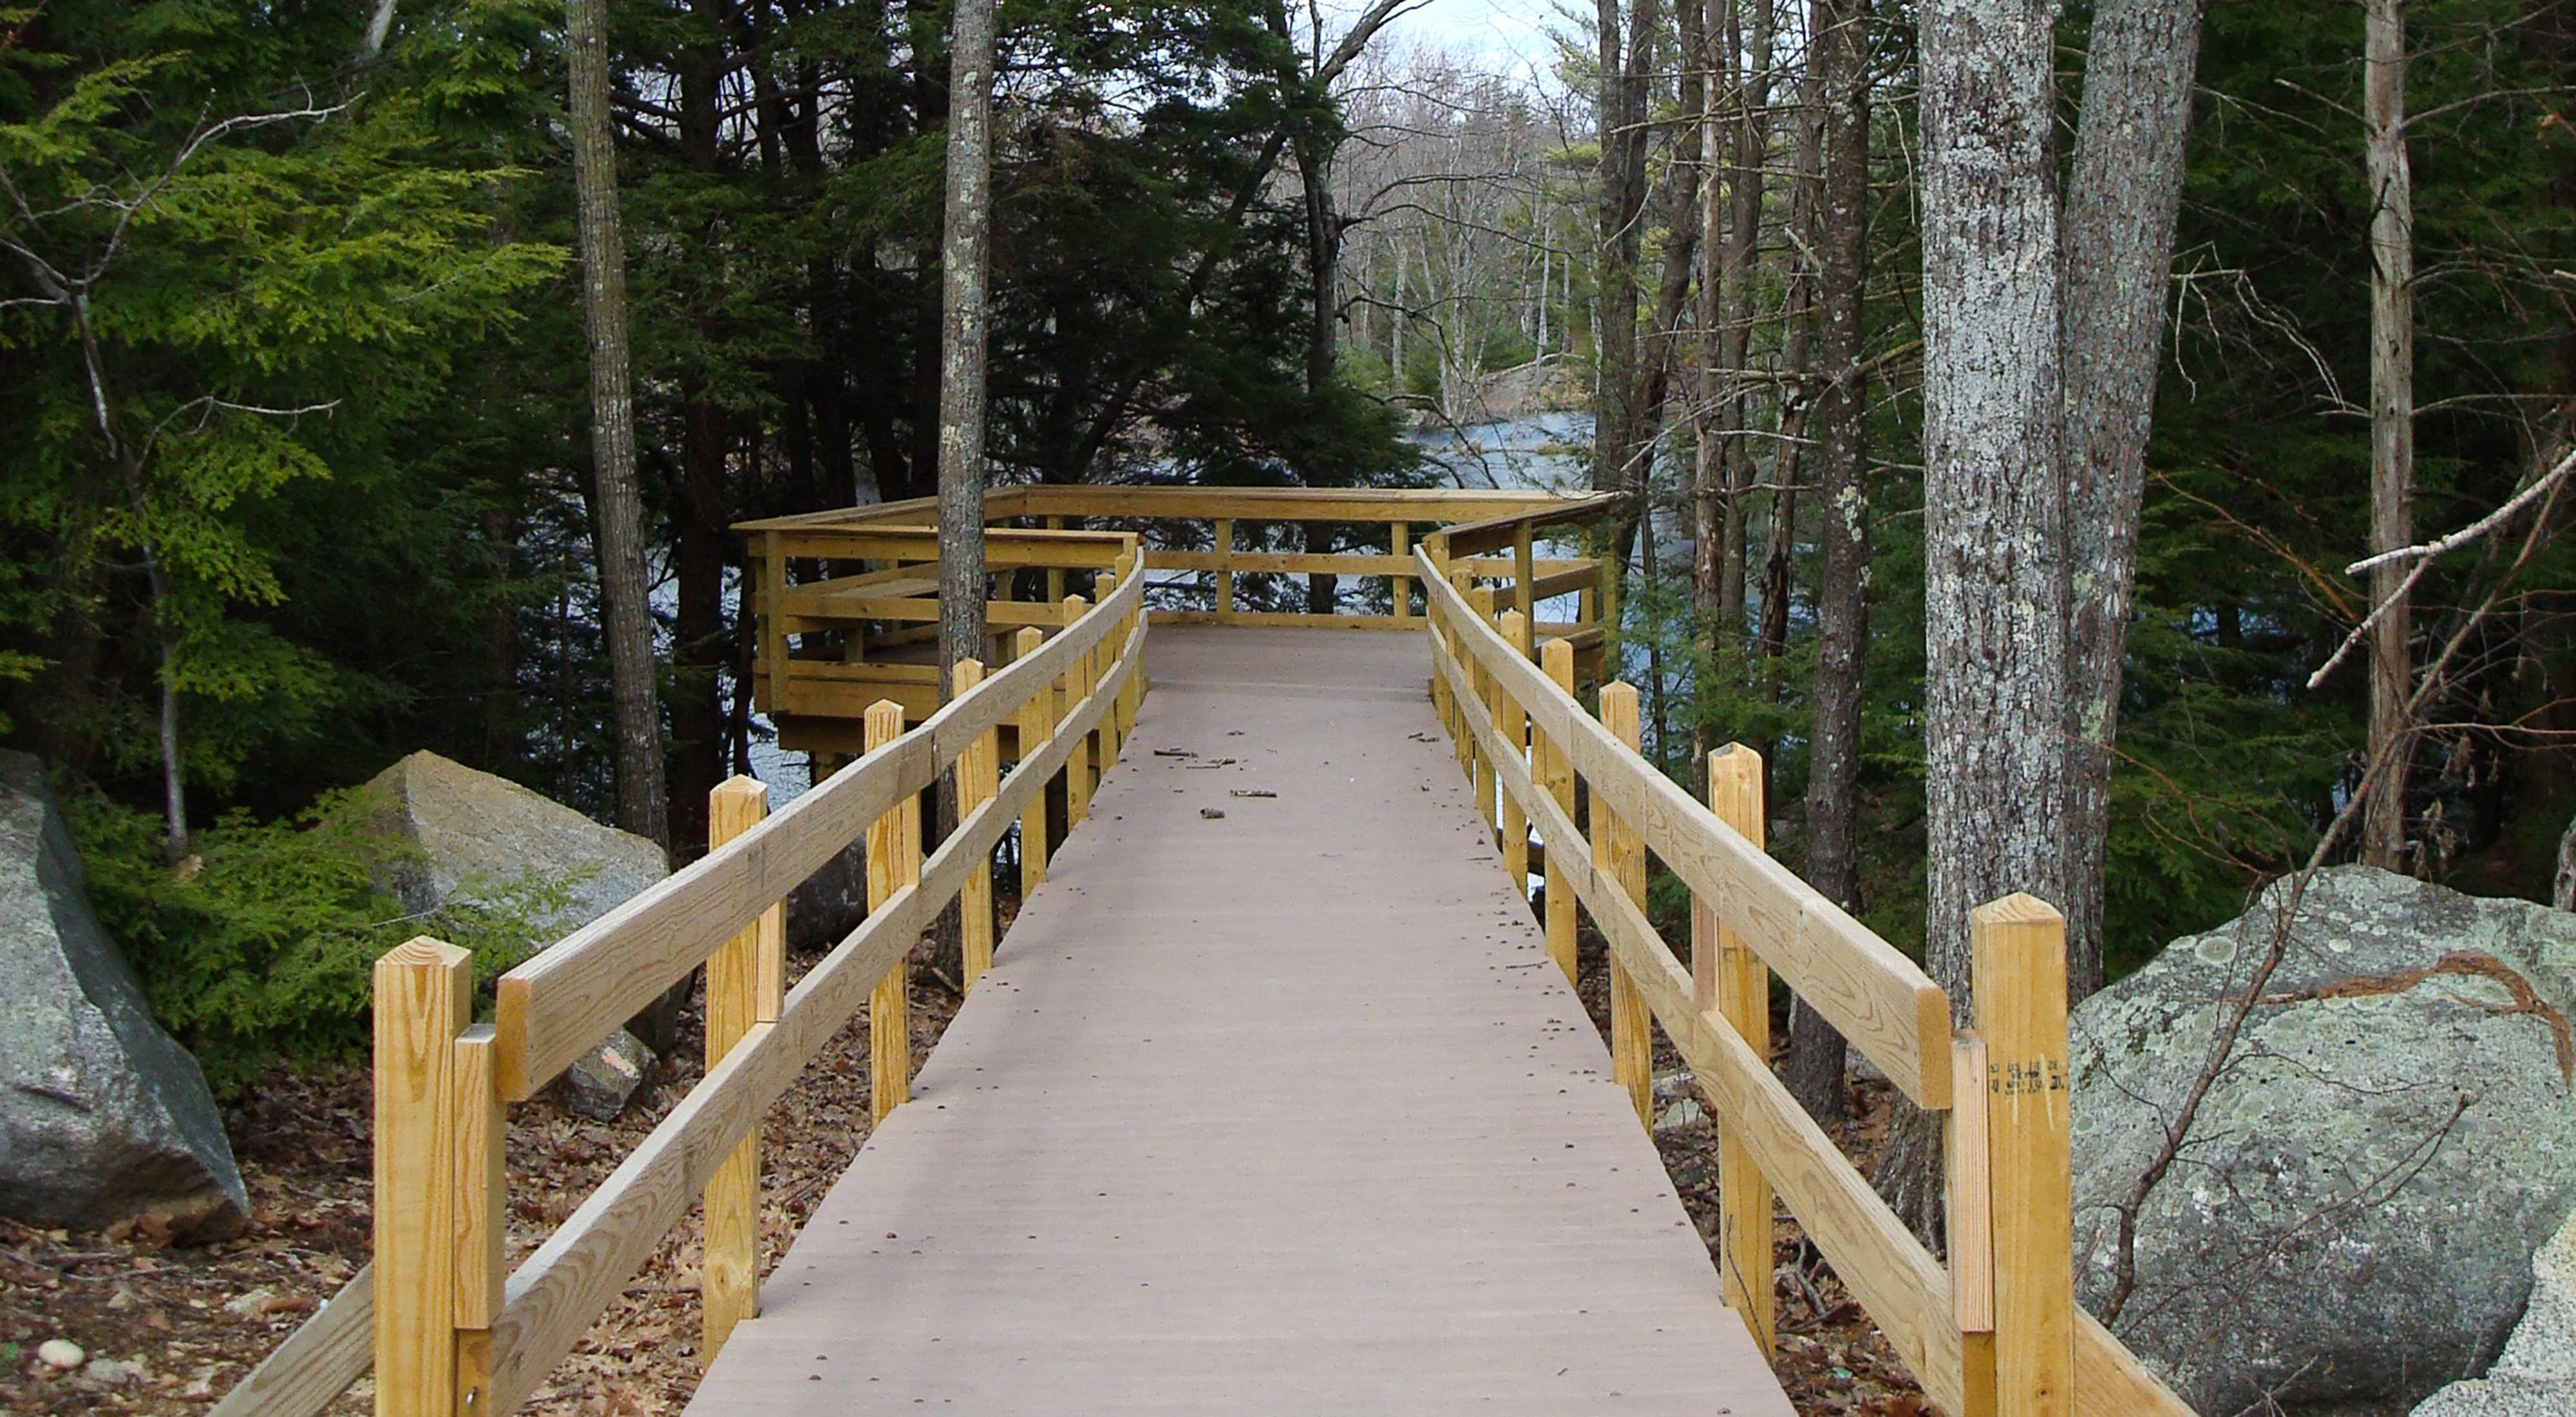 The 4.3-mile Sweet Trail runs from Longmarsh Road in Durham to Great Bay at the Lubberland Creek Preserve in Newmarket, New Hampshire.